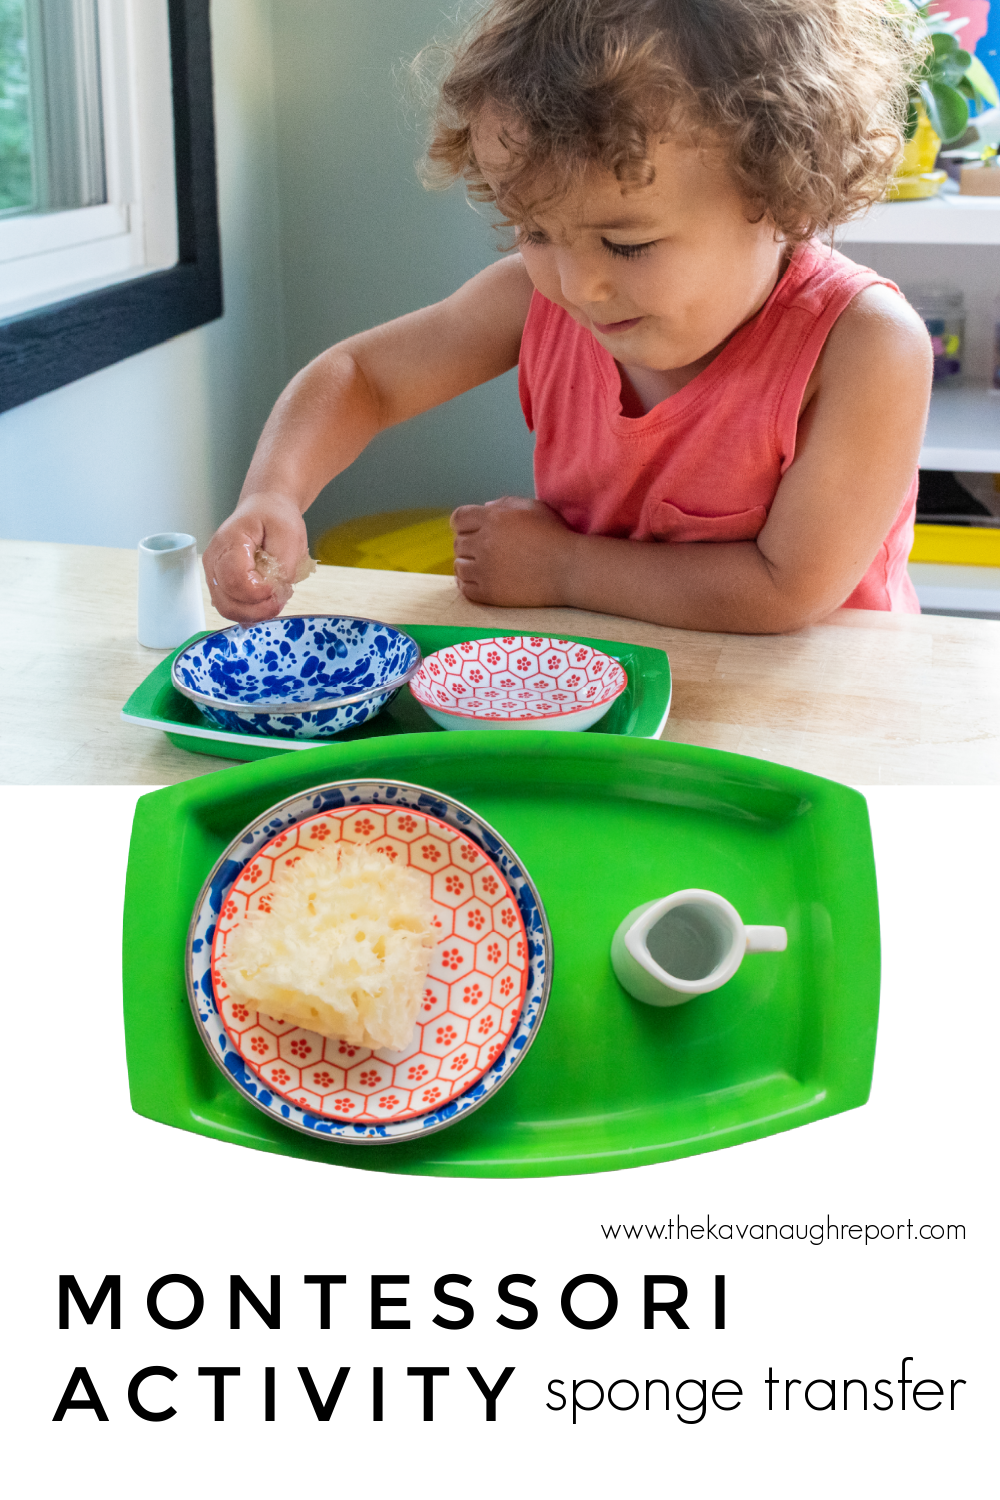 Sponge transferring is an easy, indoor, toddler activity that you can set up at home to work on fine motor skills and sequencing.